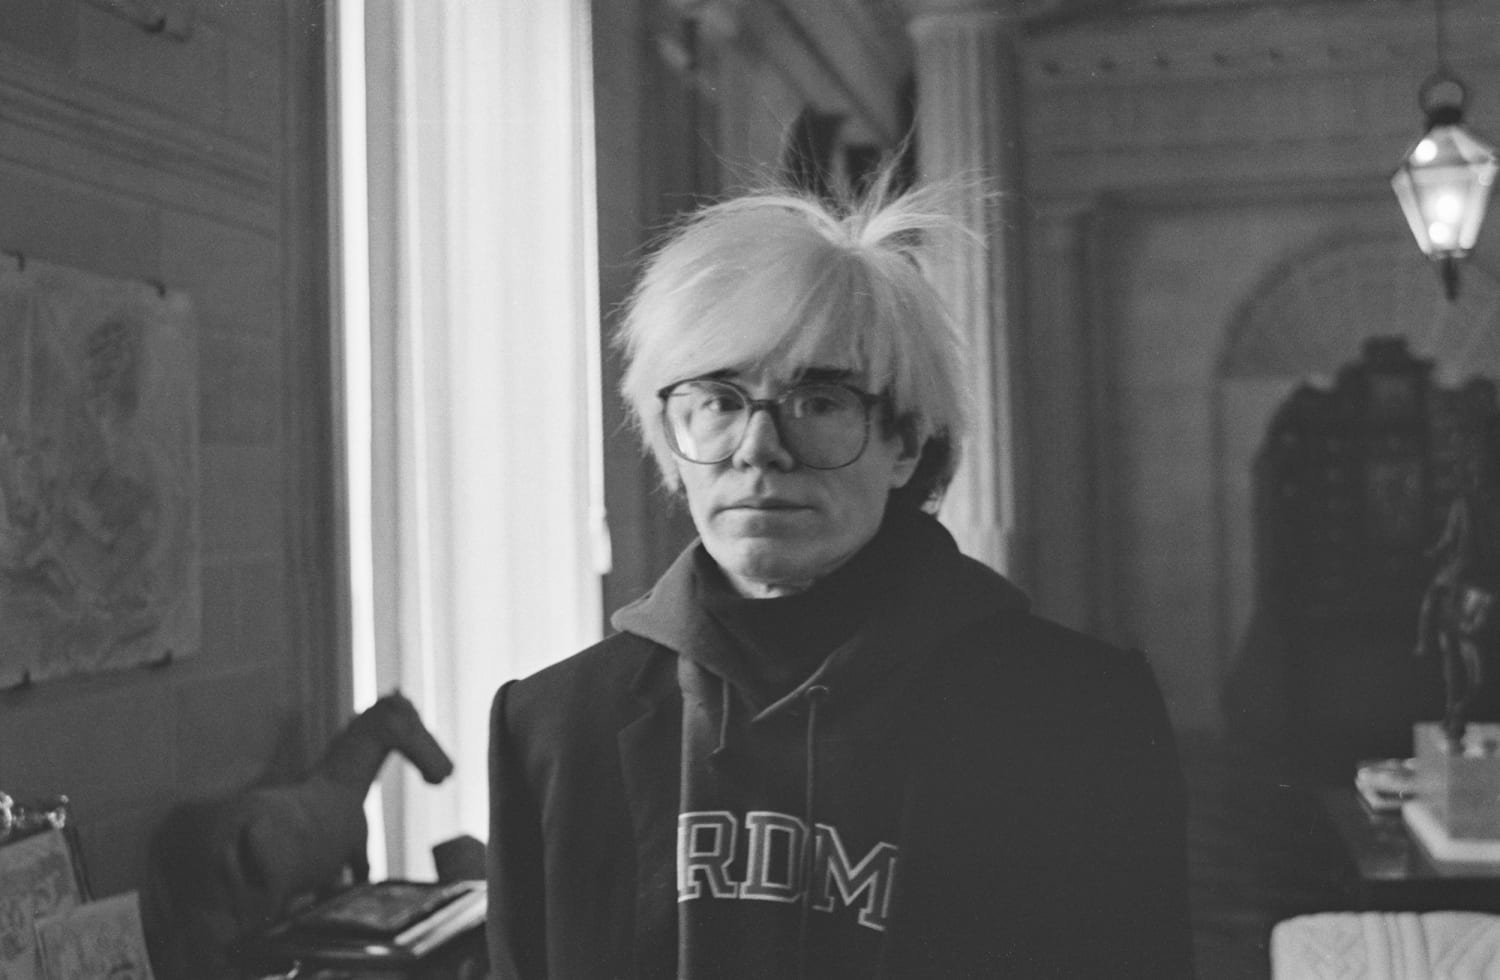 The Andy Warhol Diaries' explores how the iconic artist was shaped